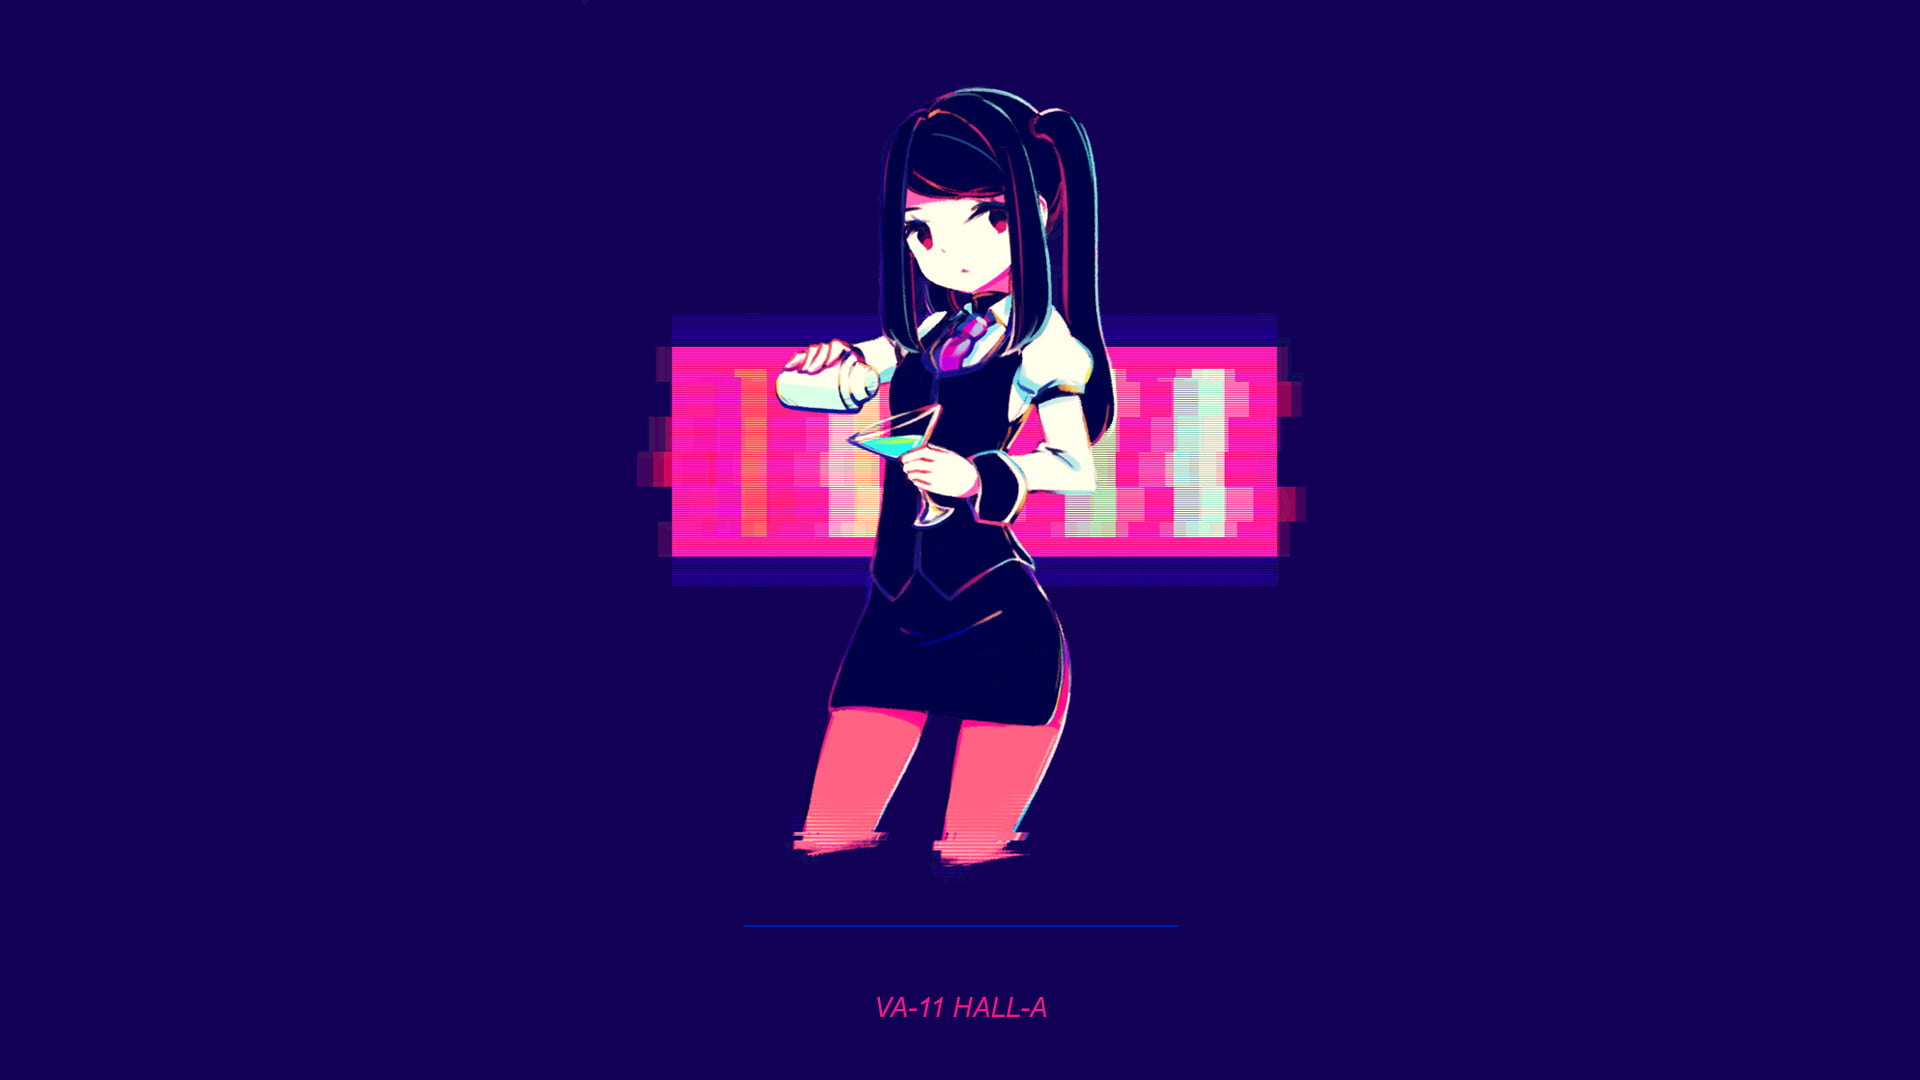 Female animated character wallpaper, cocktails, bar, neon, va-11 hall-a